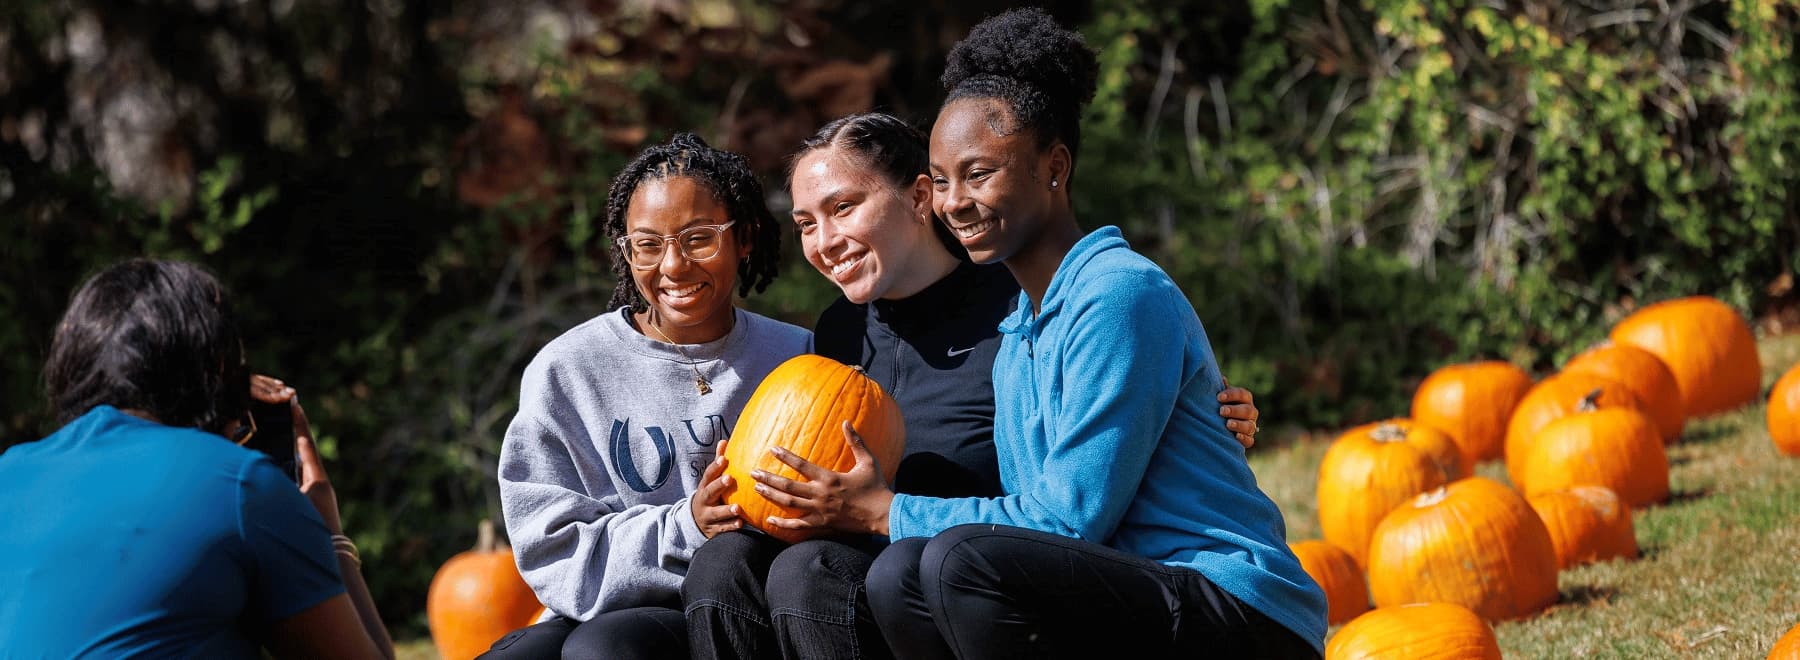 Three female students pose for a photo with a pumpkin